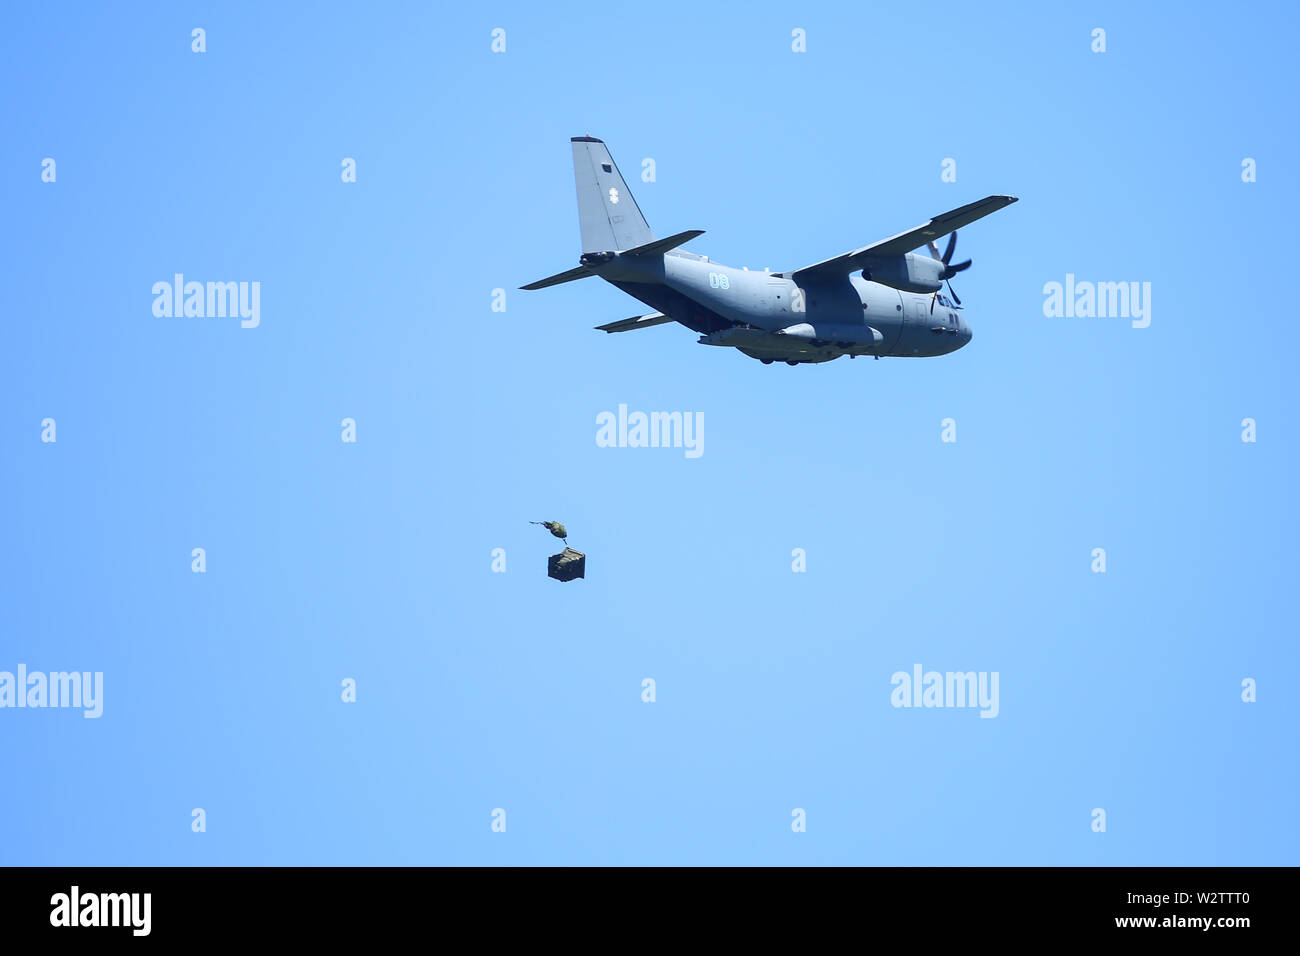 Boboc, Romania - May 22, 2019: A military crate is being parachuted from an Alenia C-27J Spartan military cargo plane during a drill. Stock Photo